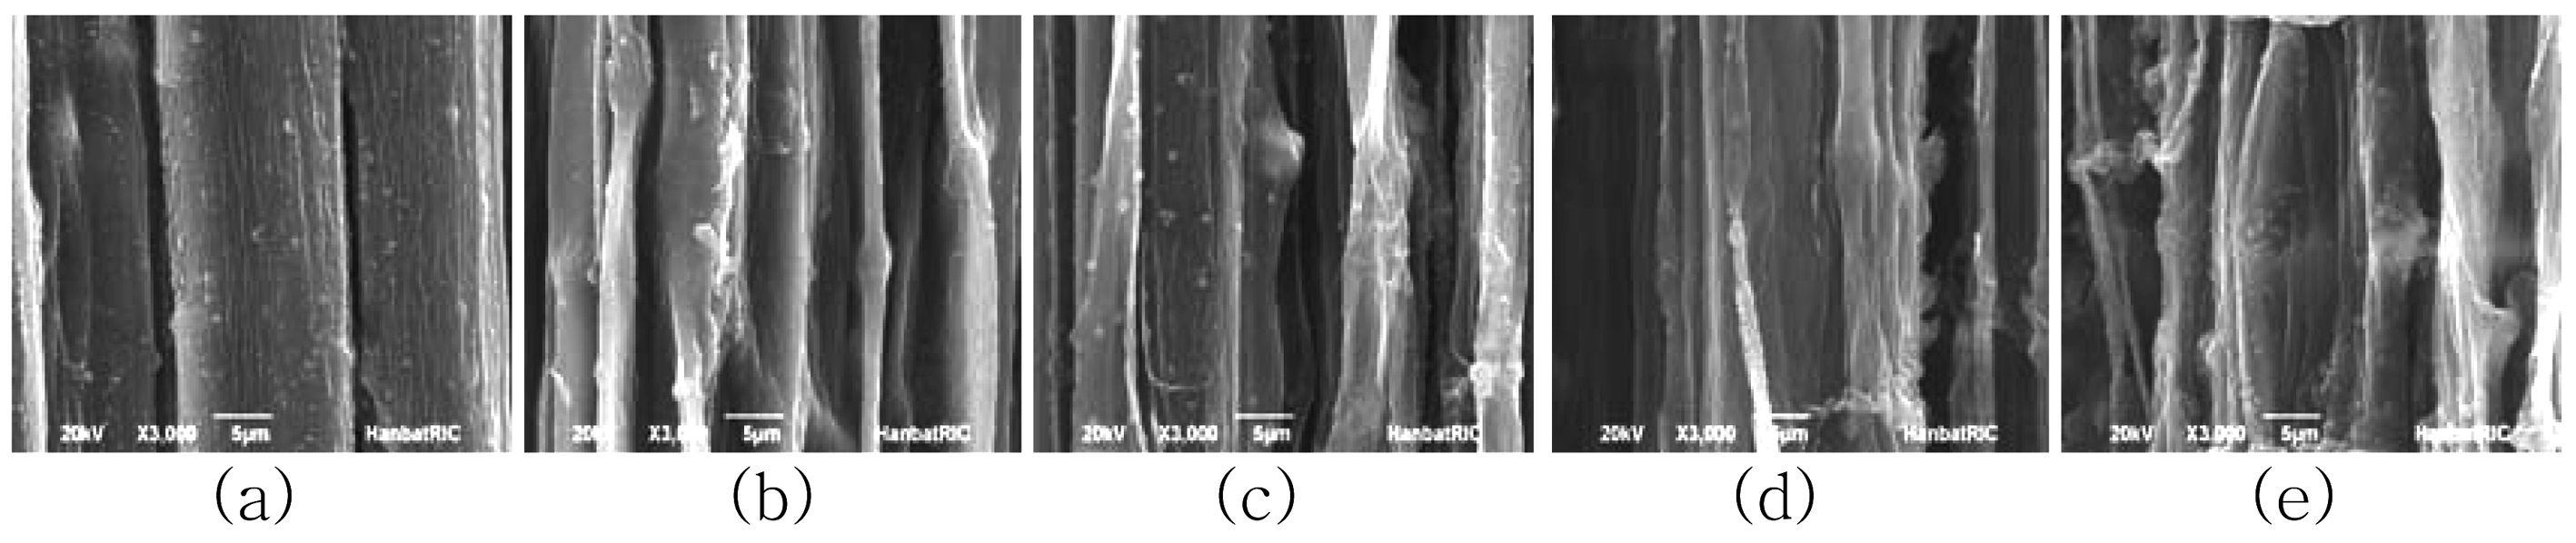 SEM micrographs of ramie fibers: (a) raw ramie and ramie irradiated with (b) 1 kGy, (c) 3 kGy, (d) 5 kGy and (e) 10 kGy(×3000).